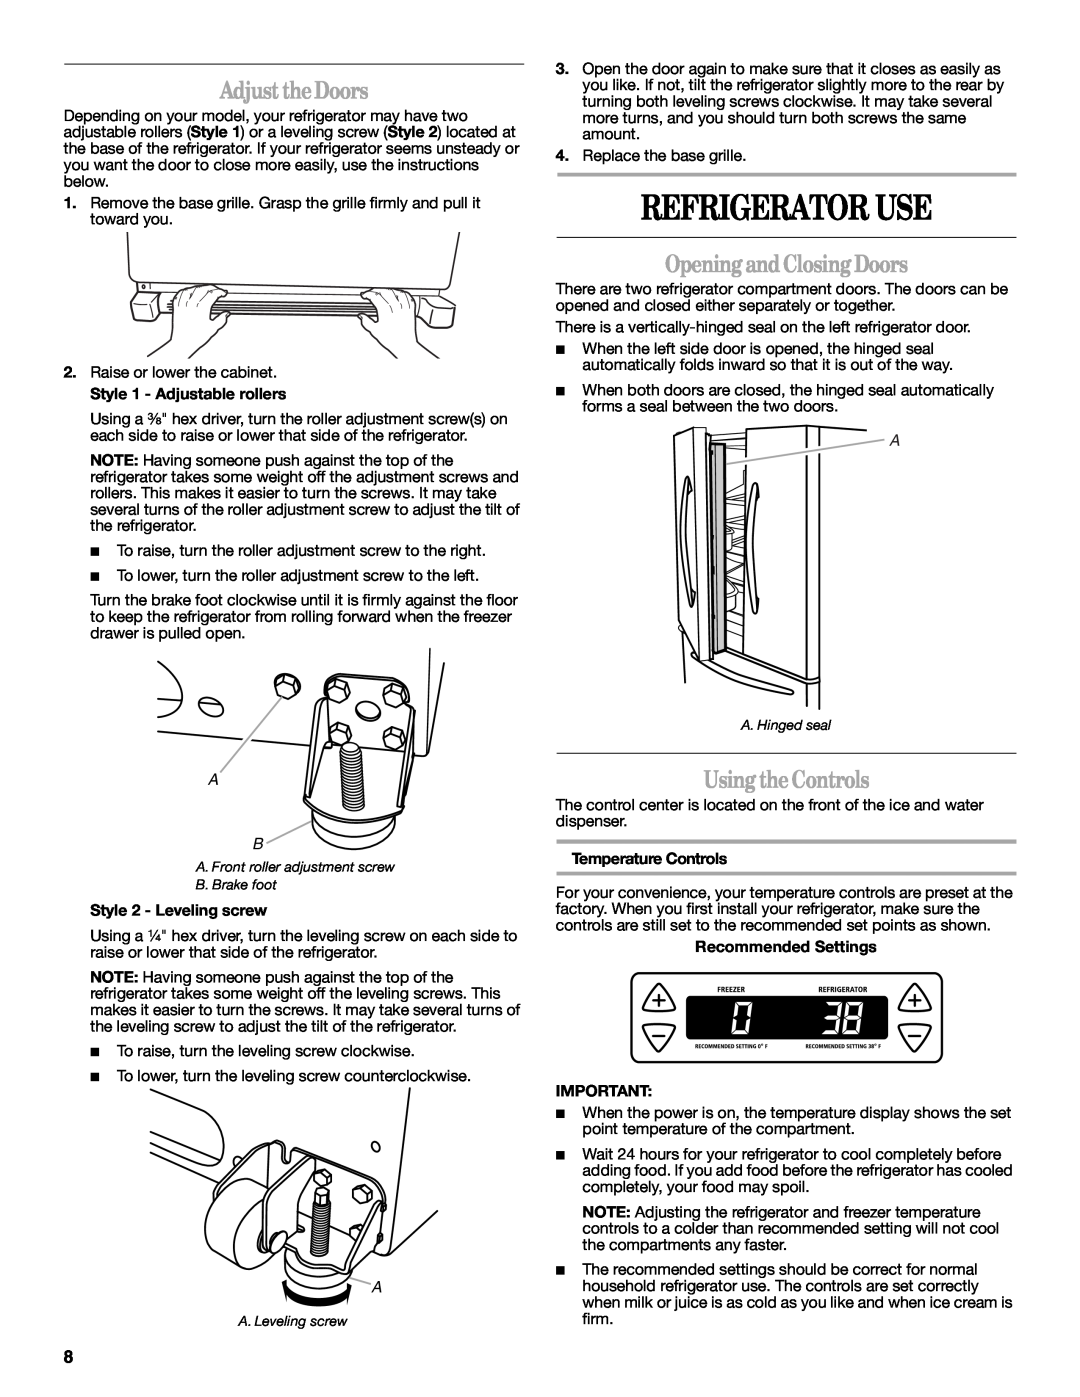 Whirlpool W10215185A Refrigerator Use, Adjust the Doors, Opening and Closing Doors, Using theControls 